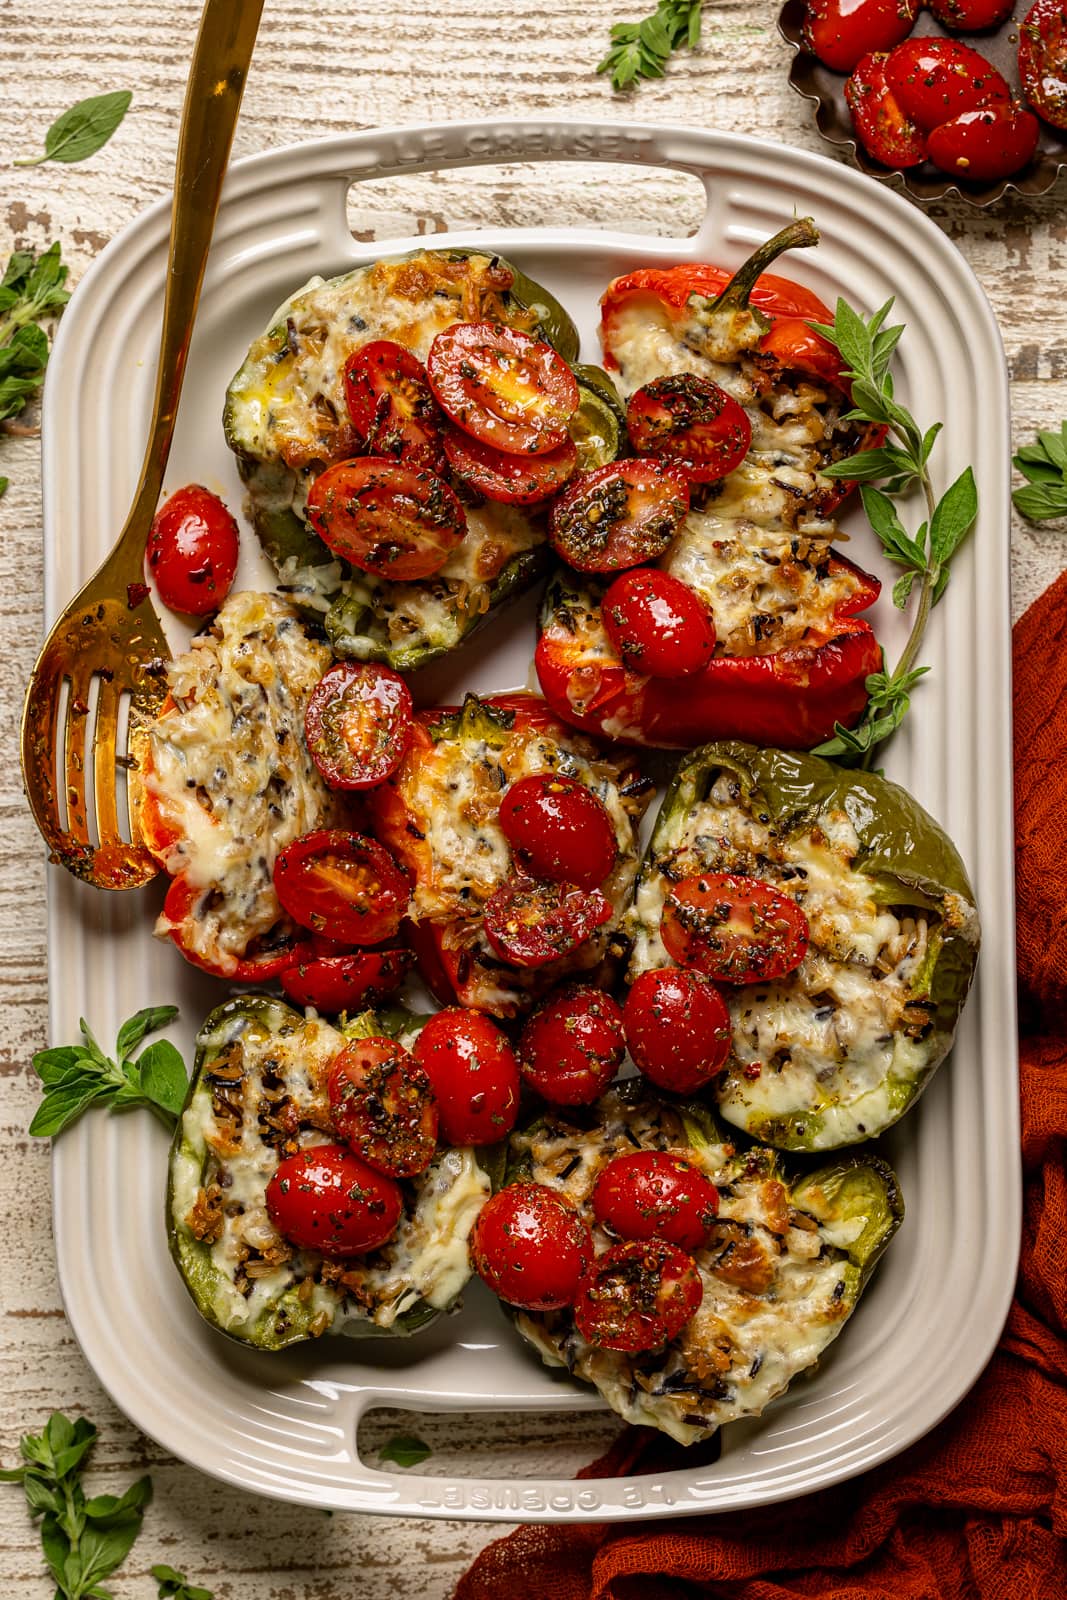 Stuffed peppers on a serving platter with a gold spoon.